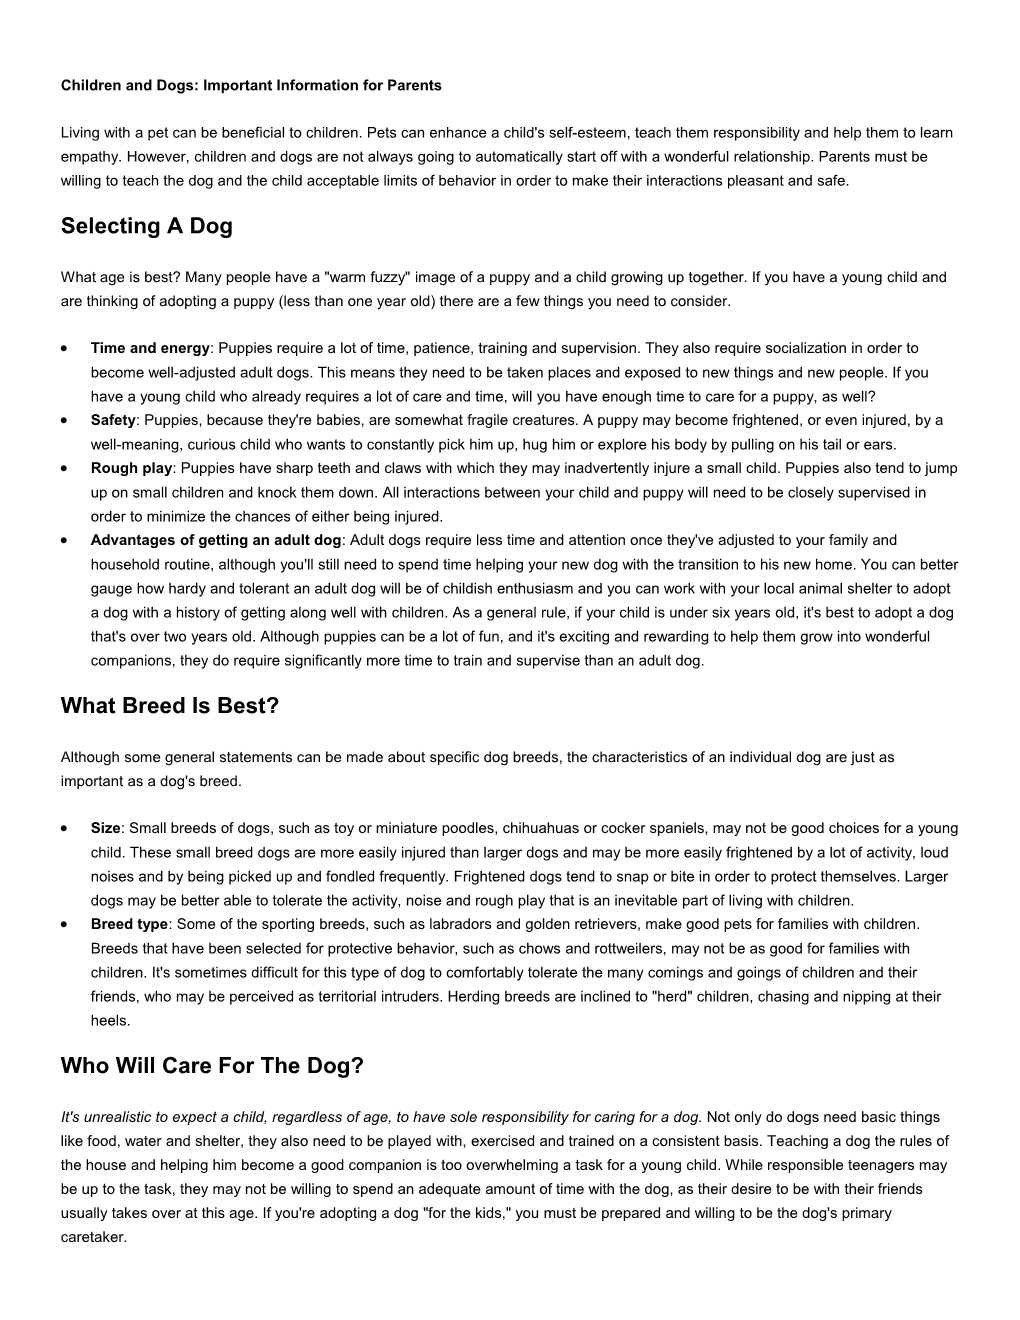 Children and Dogs: Important Information for Parents